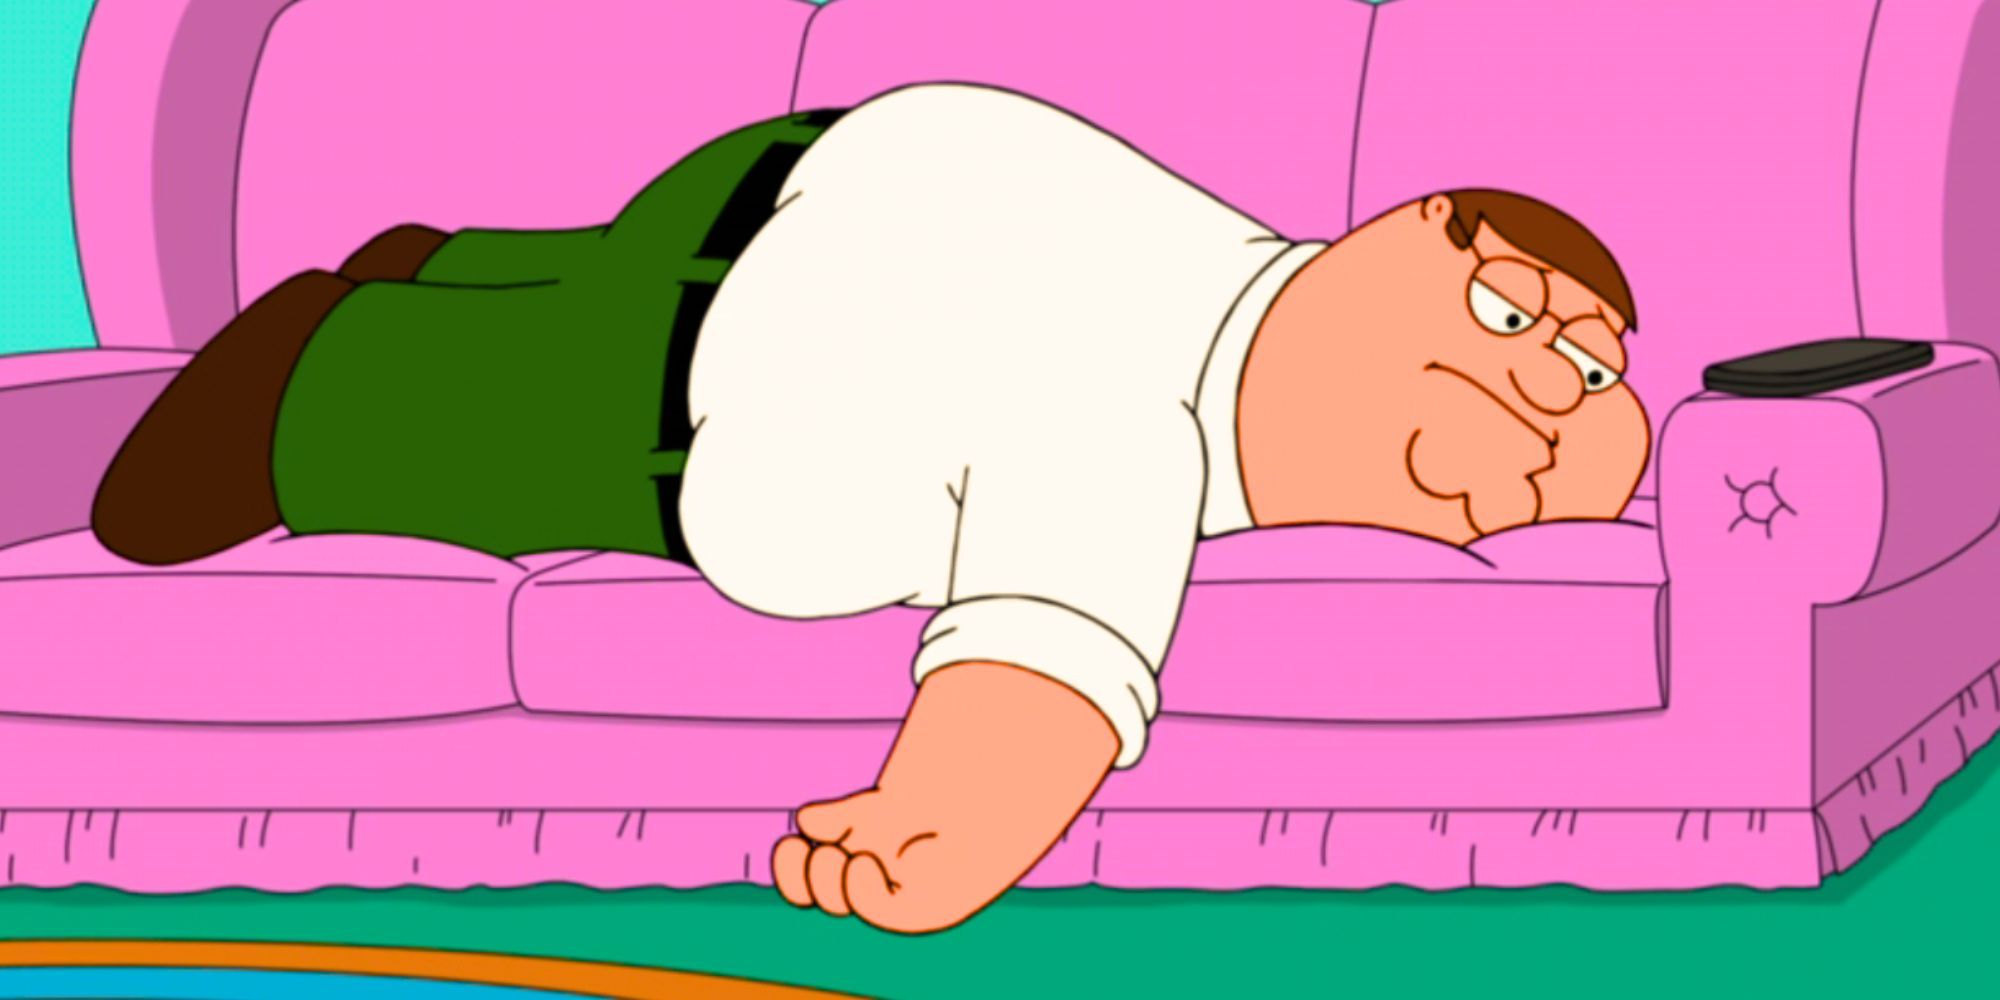 Peter Griffin looking sad on the couch in Family Guy